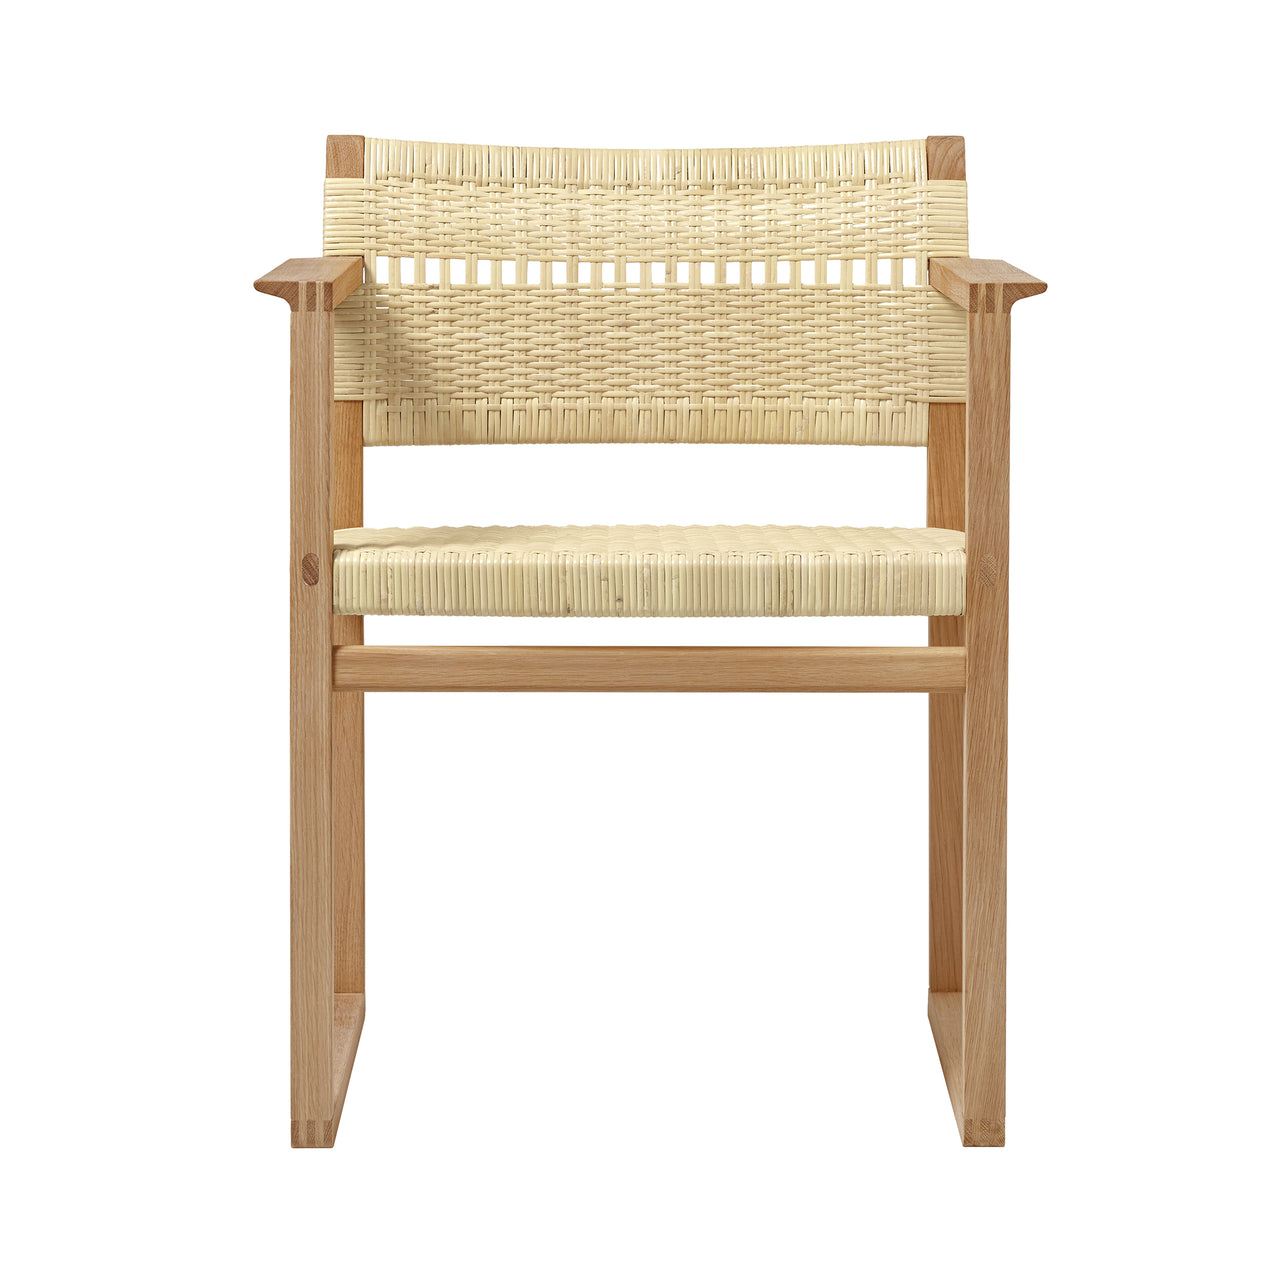 BM62 + BM61 Chair: Natural Cane Wicker + With Arm + Oiled Oak